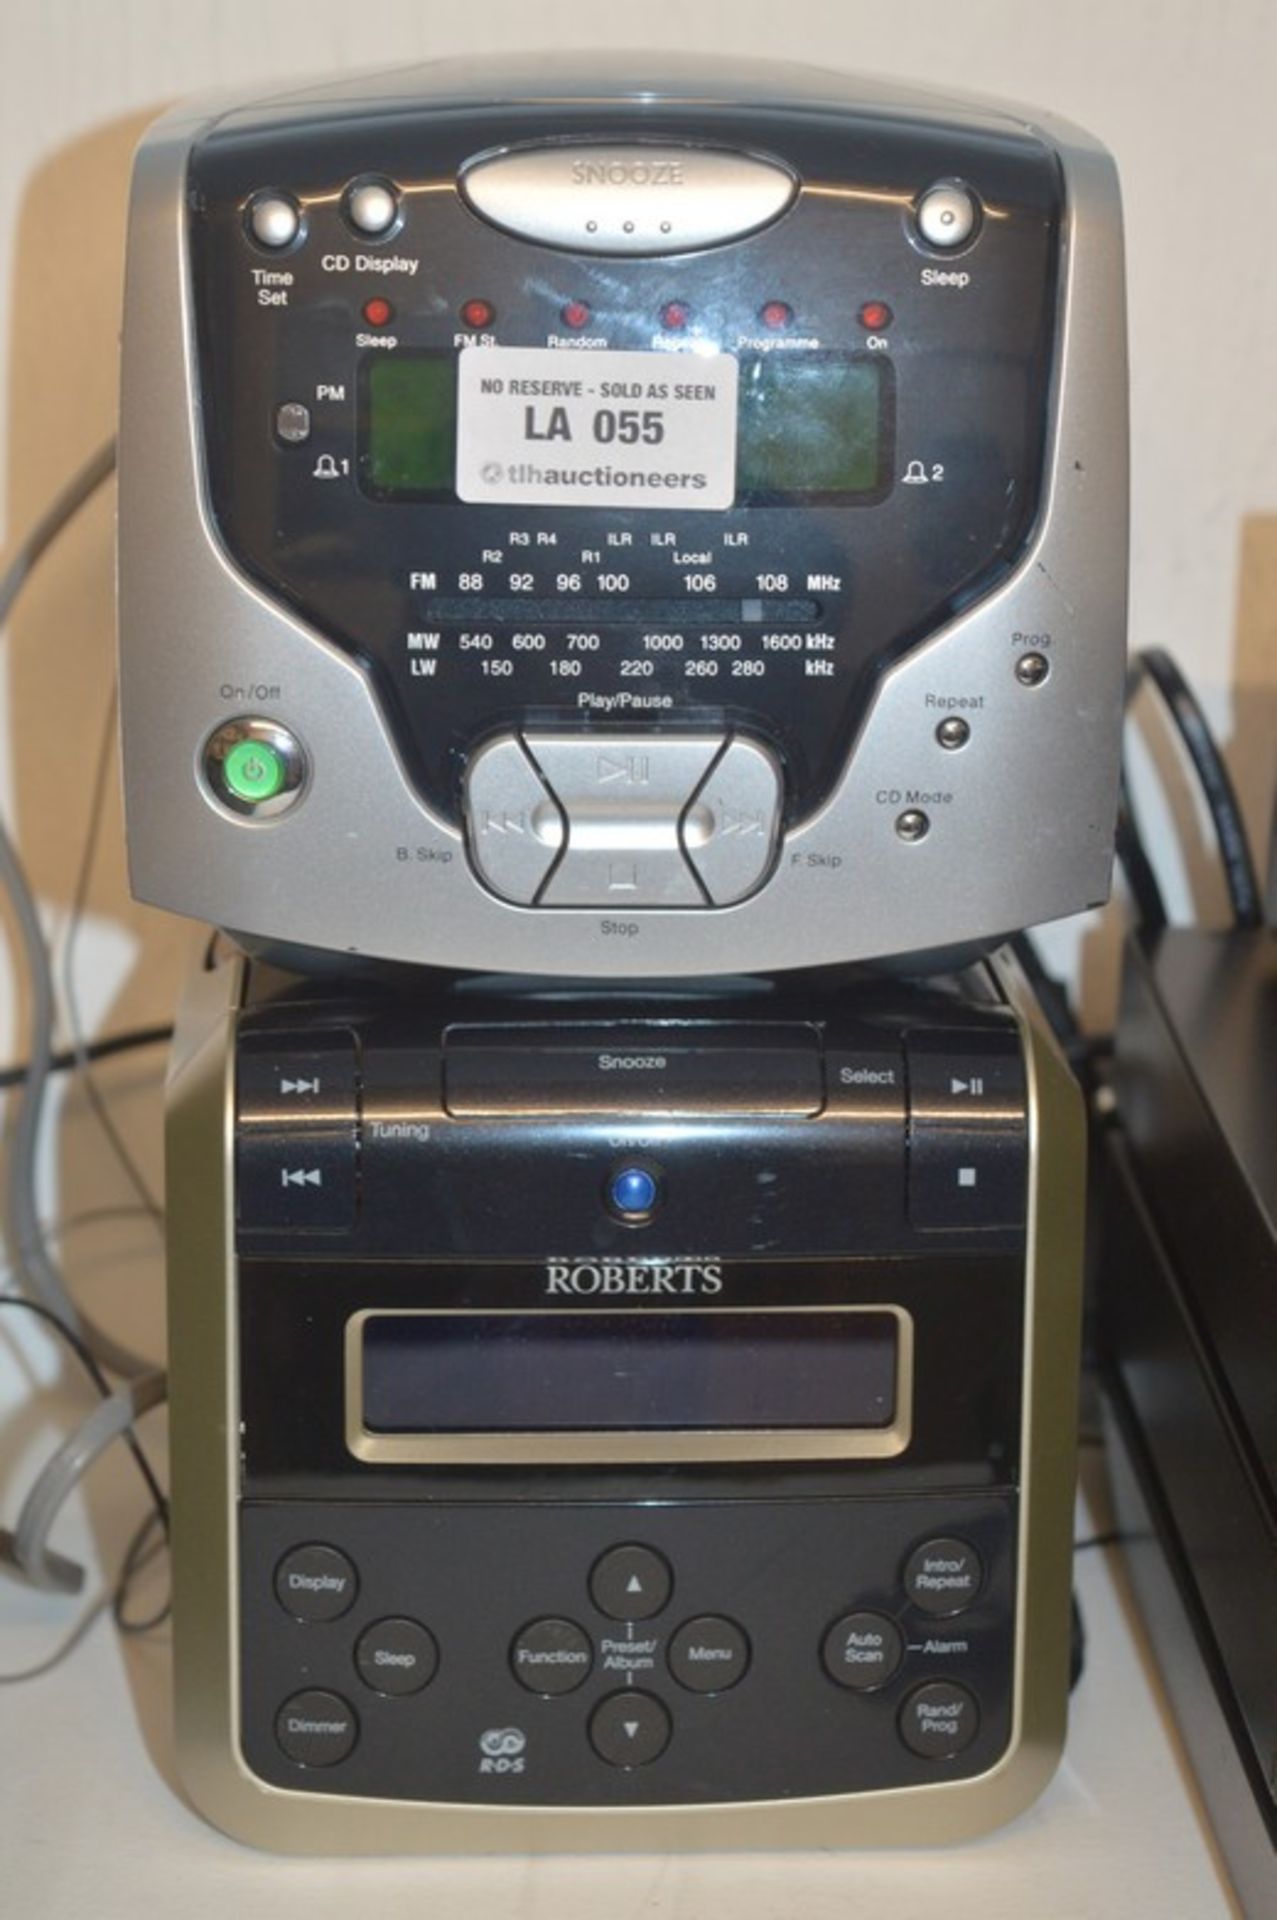 2 X ASSORTED ROBERTS DAB DIGITAL RADIOS/CD PLAYERS COMBINED RRP £200.00 11/08/15